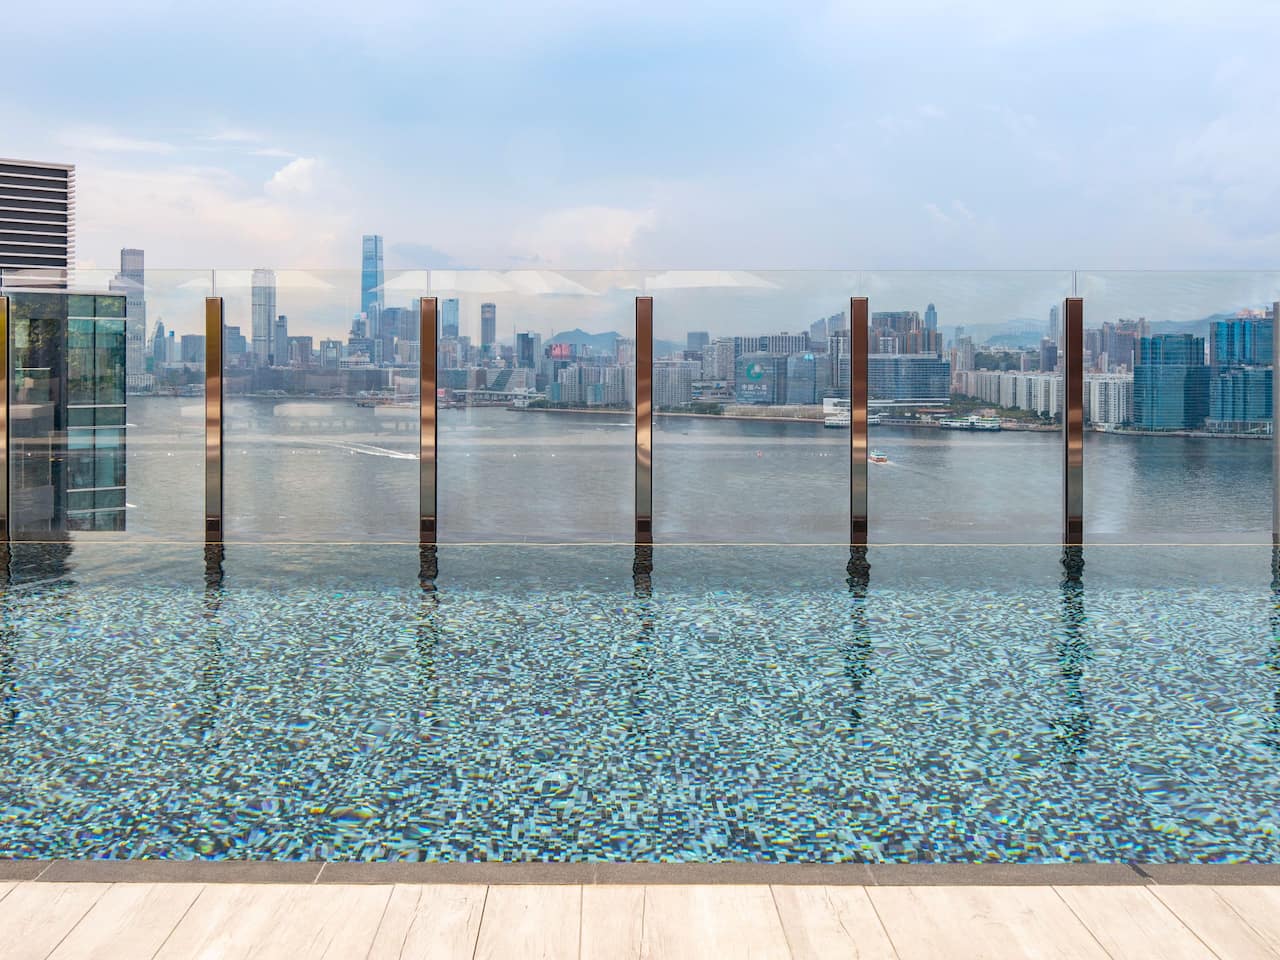 Luxury Harbourfront City Hotel Hyatt Centric Victoria Harbour Hong Kong